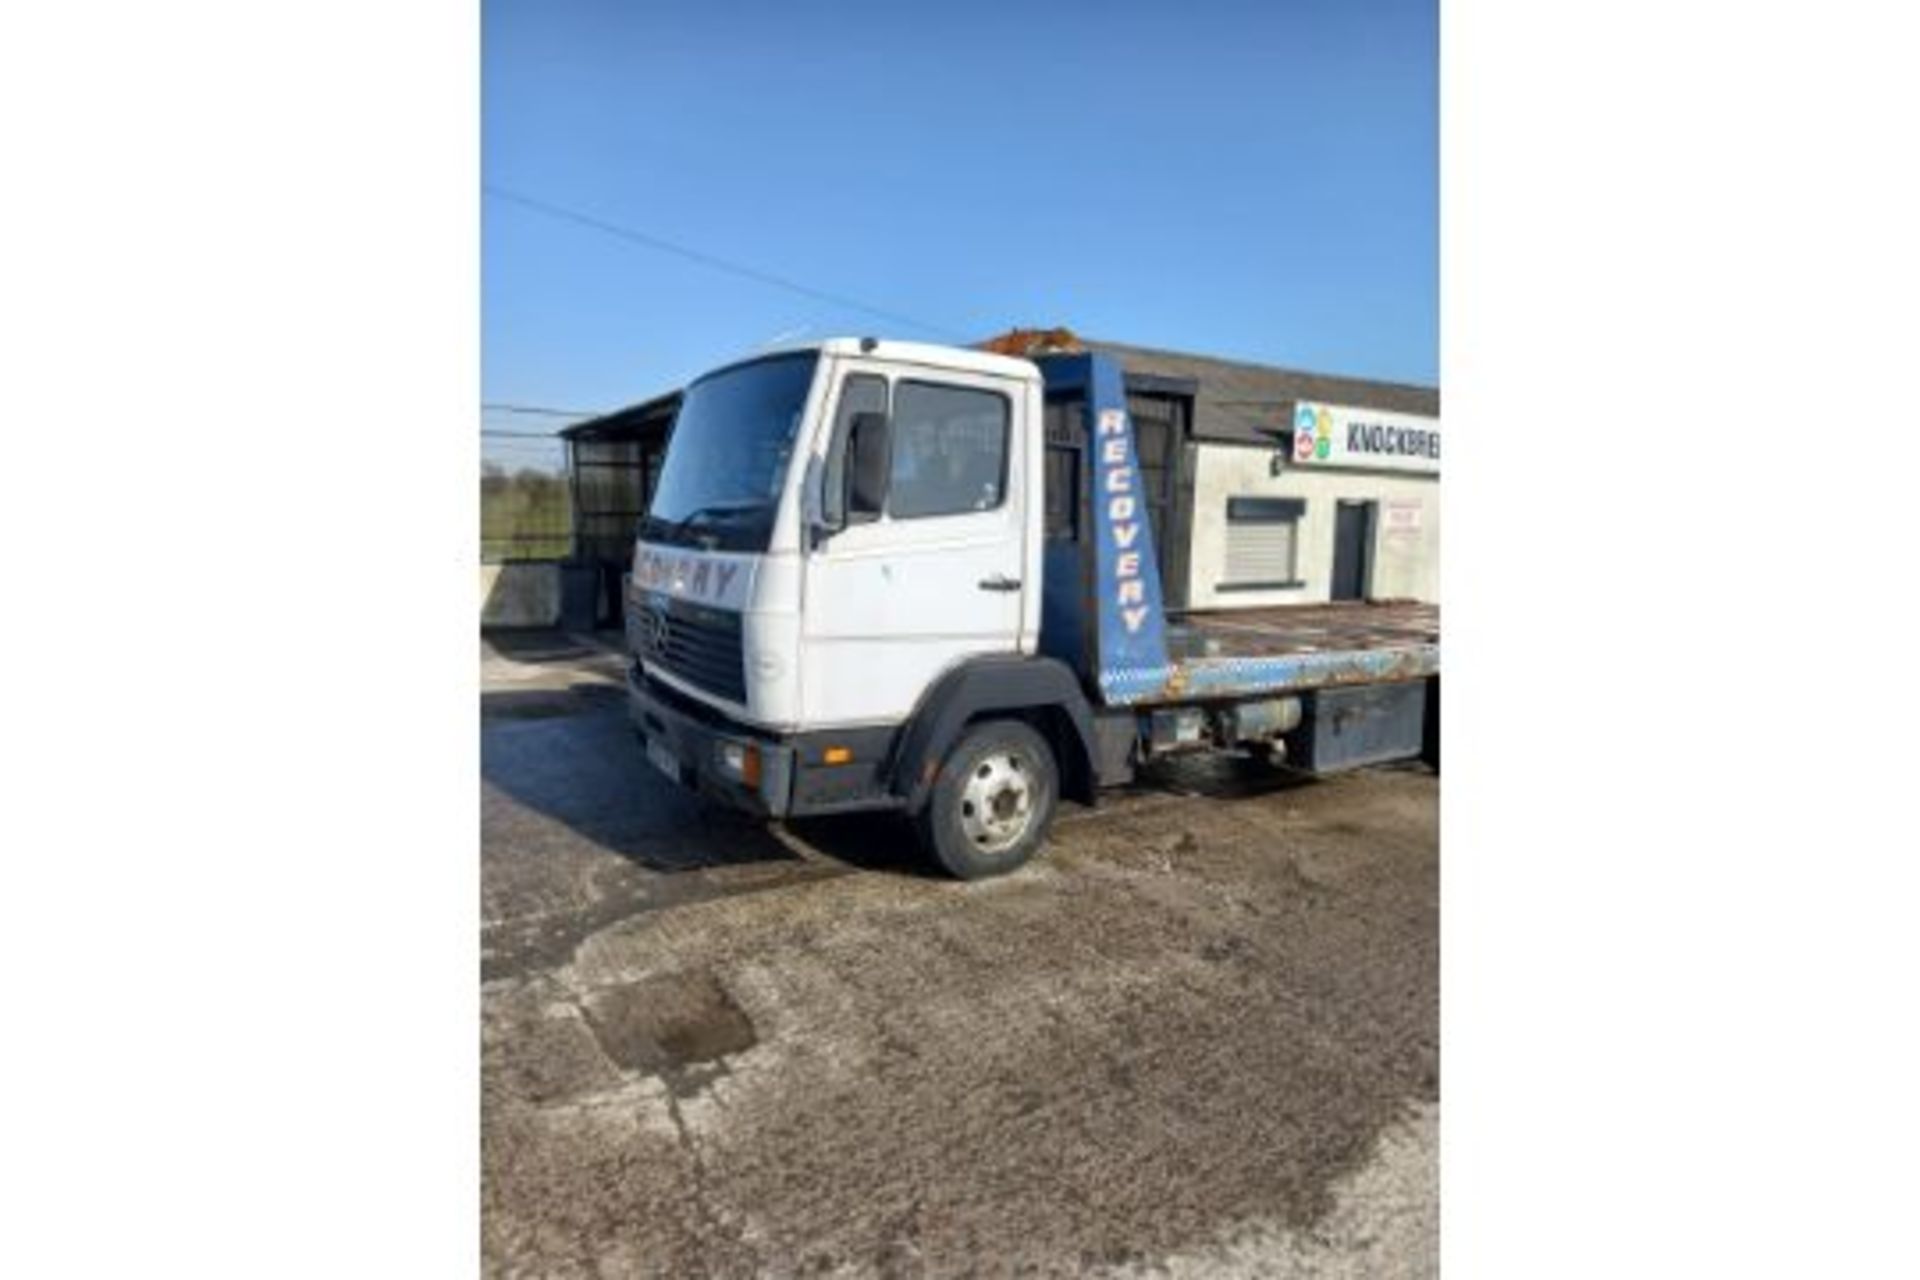 1997 MERCEDES LK900 RECOVERY TRUCK NO PSV REQUIRED - Image 2 of 6